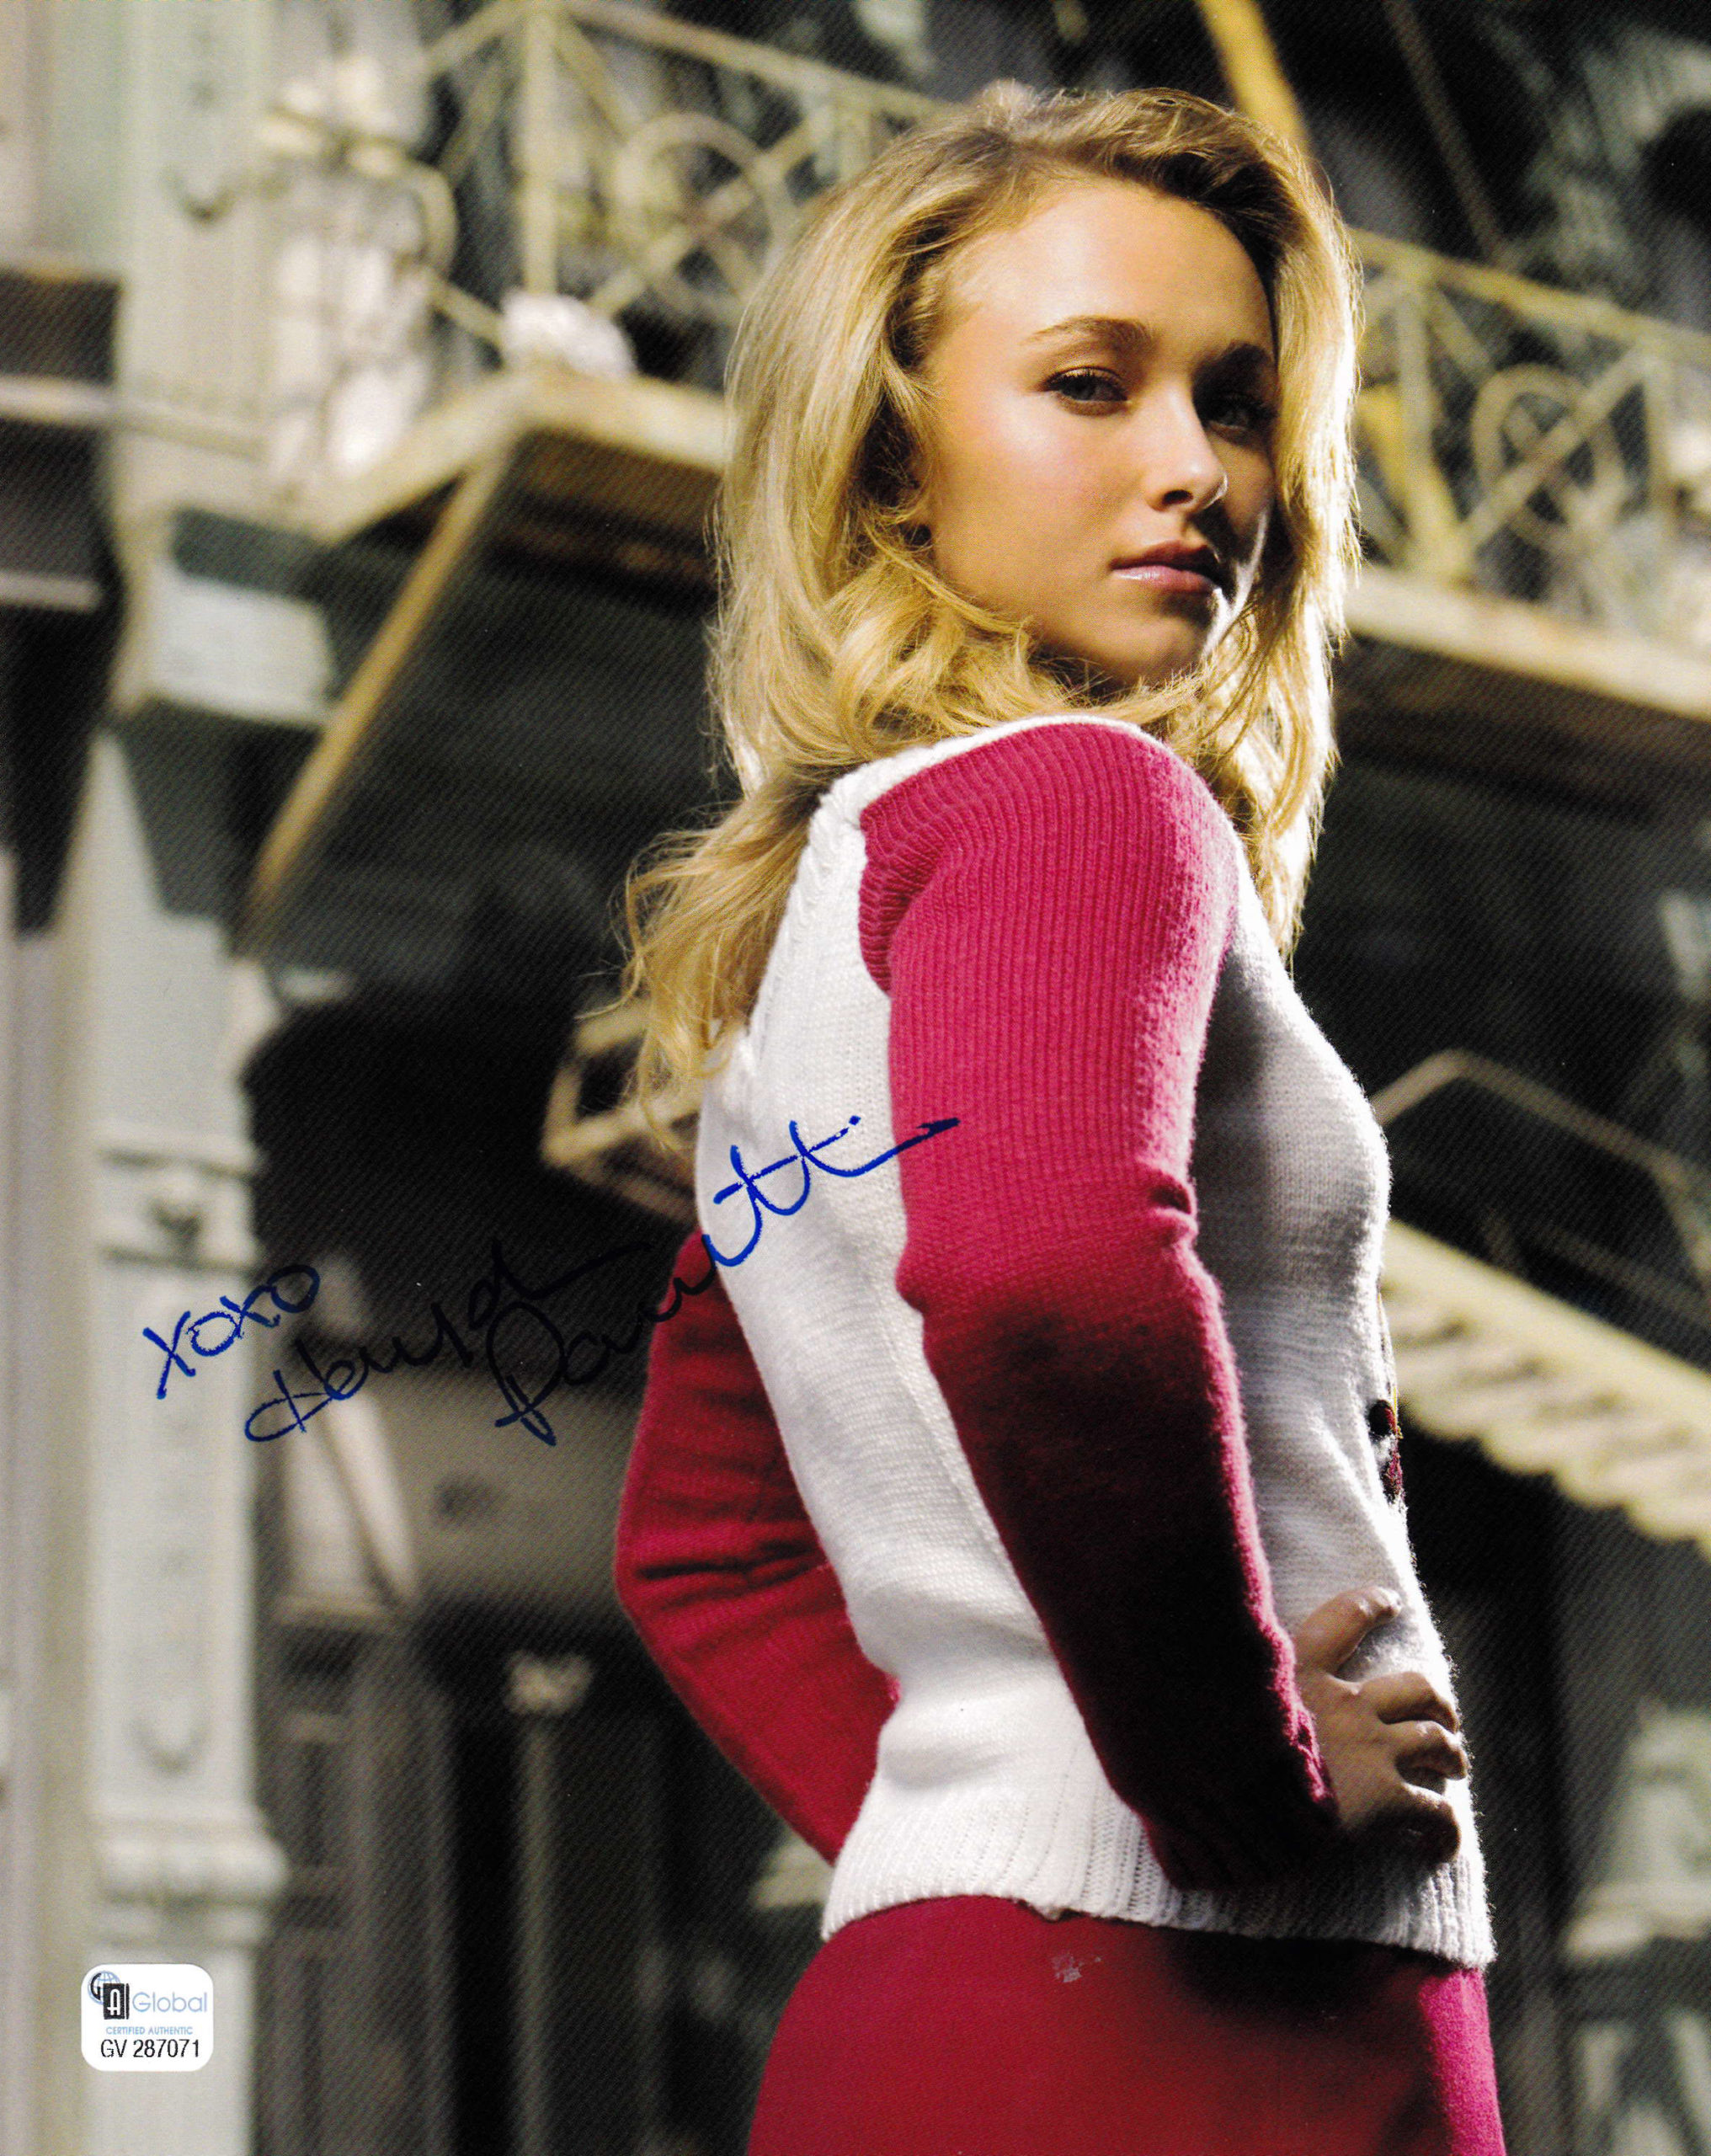 Hayden Panettiere HEROES signed 8x10 photo - Fanboy Expo Store